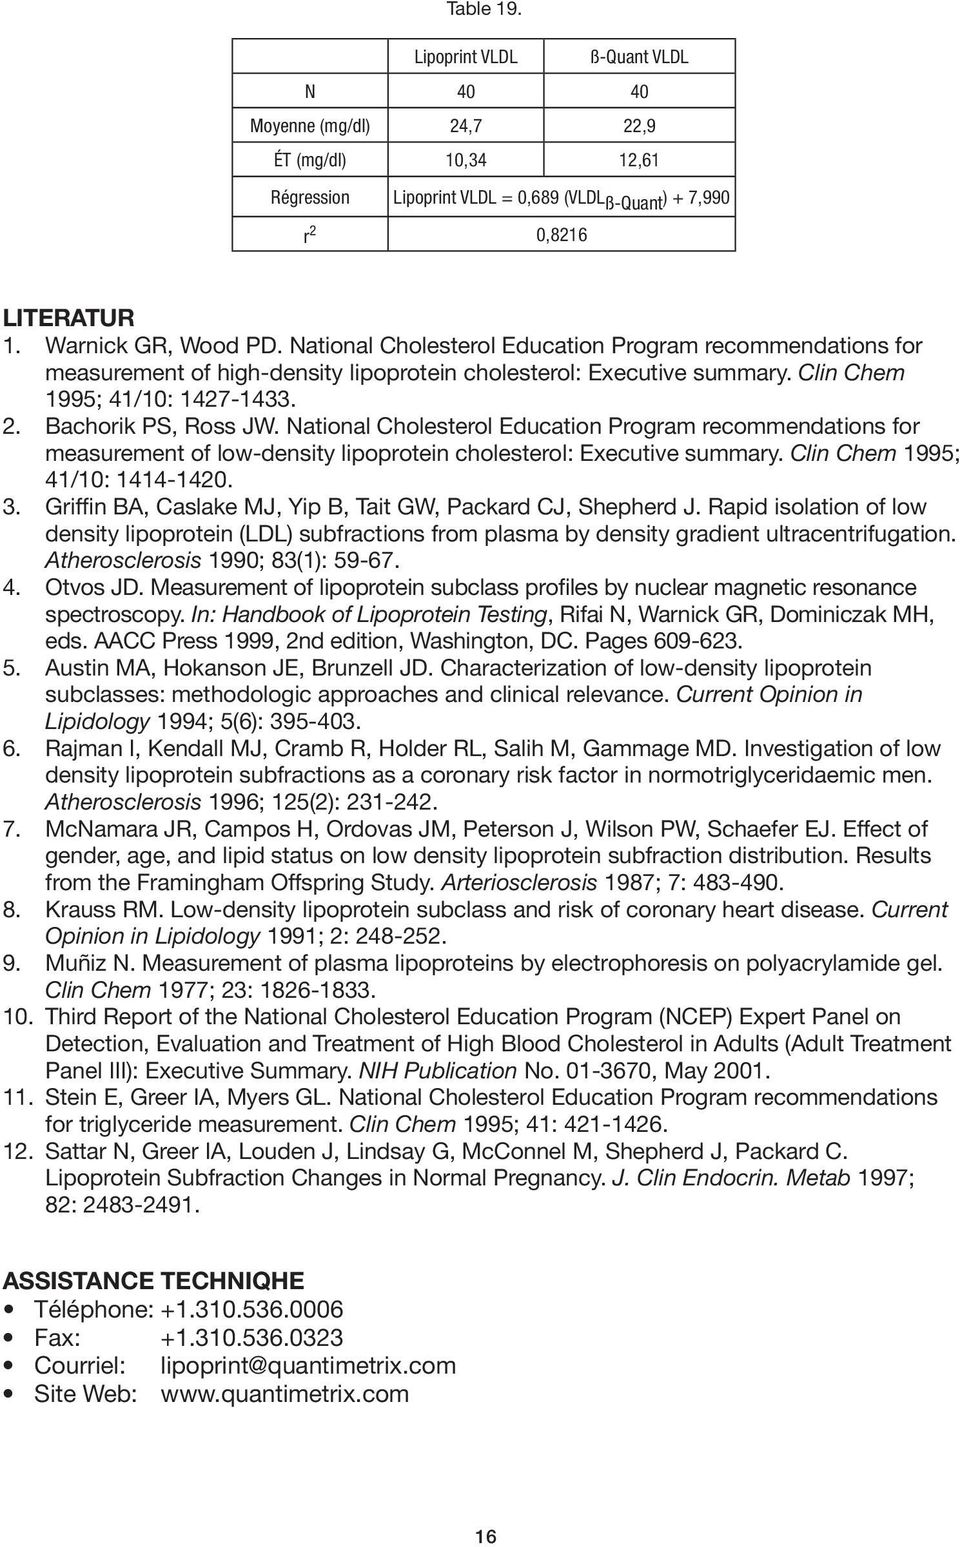 National Cholesterol Education Program recommendations for measurement of low-density lipoprotein cholesterol: Executive summary. Clin Chem 1995; 41/10: 1414-1420. 3.